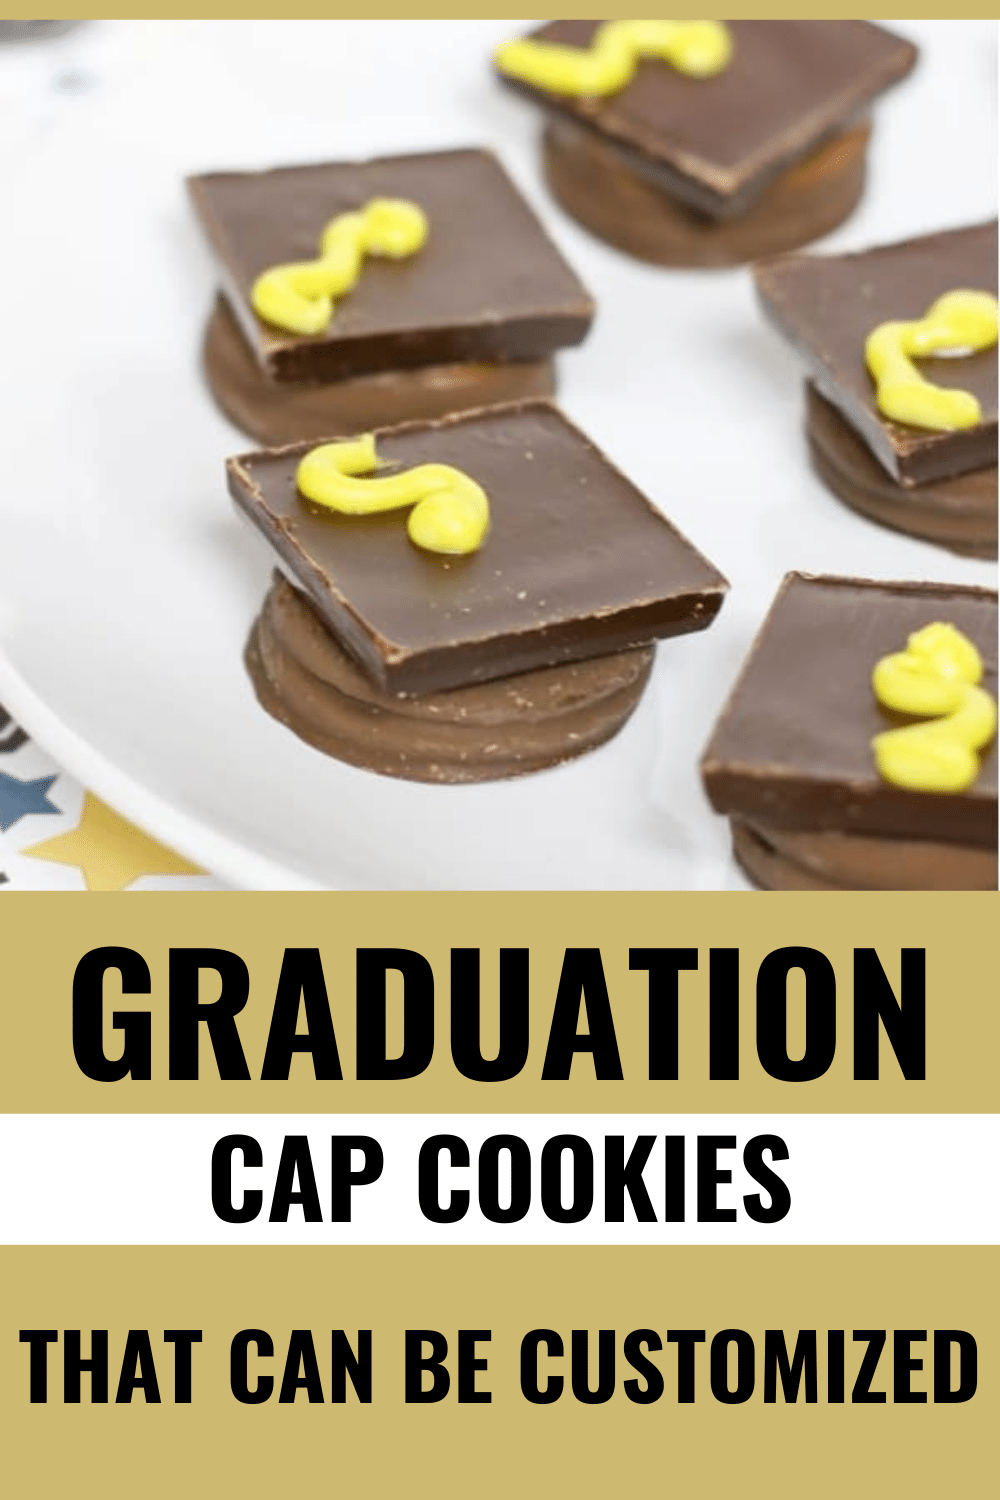 Graduation Cap Cookies are easy to make and will be perfect for any graduation party. Made with Oreo cookies and chocolate, they taste great too! #graduation #graduationcookies #cookies via @wondermomwannab